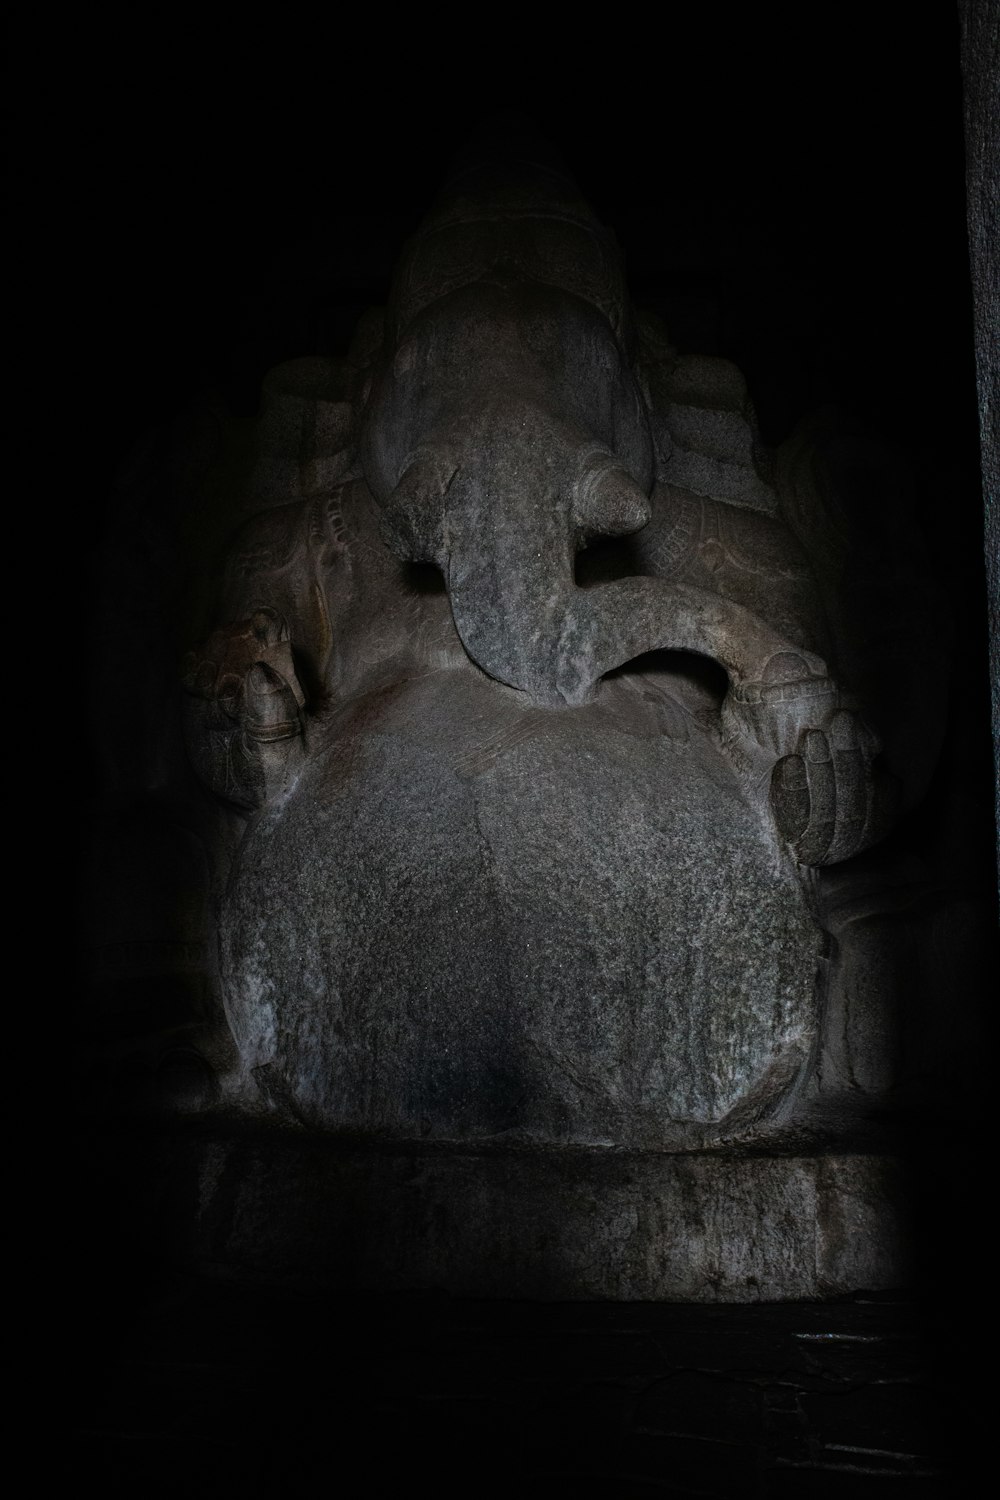 a statue of an elephant in a dark room